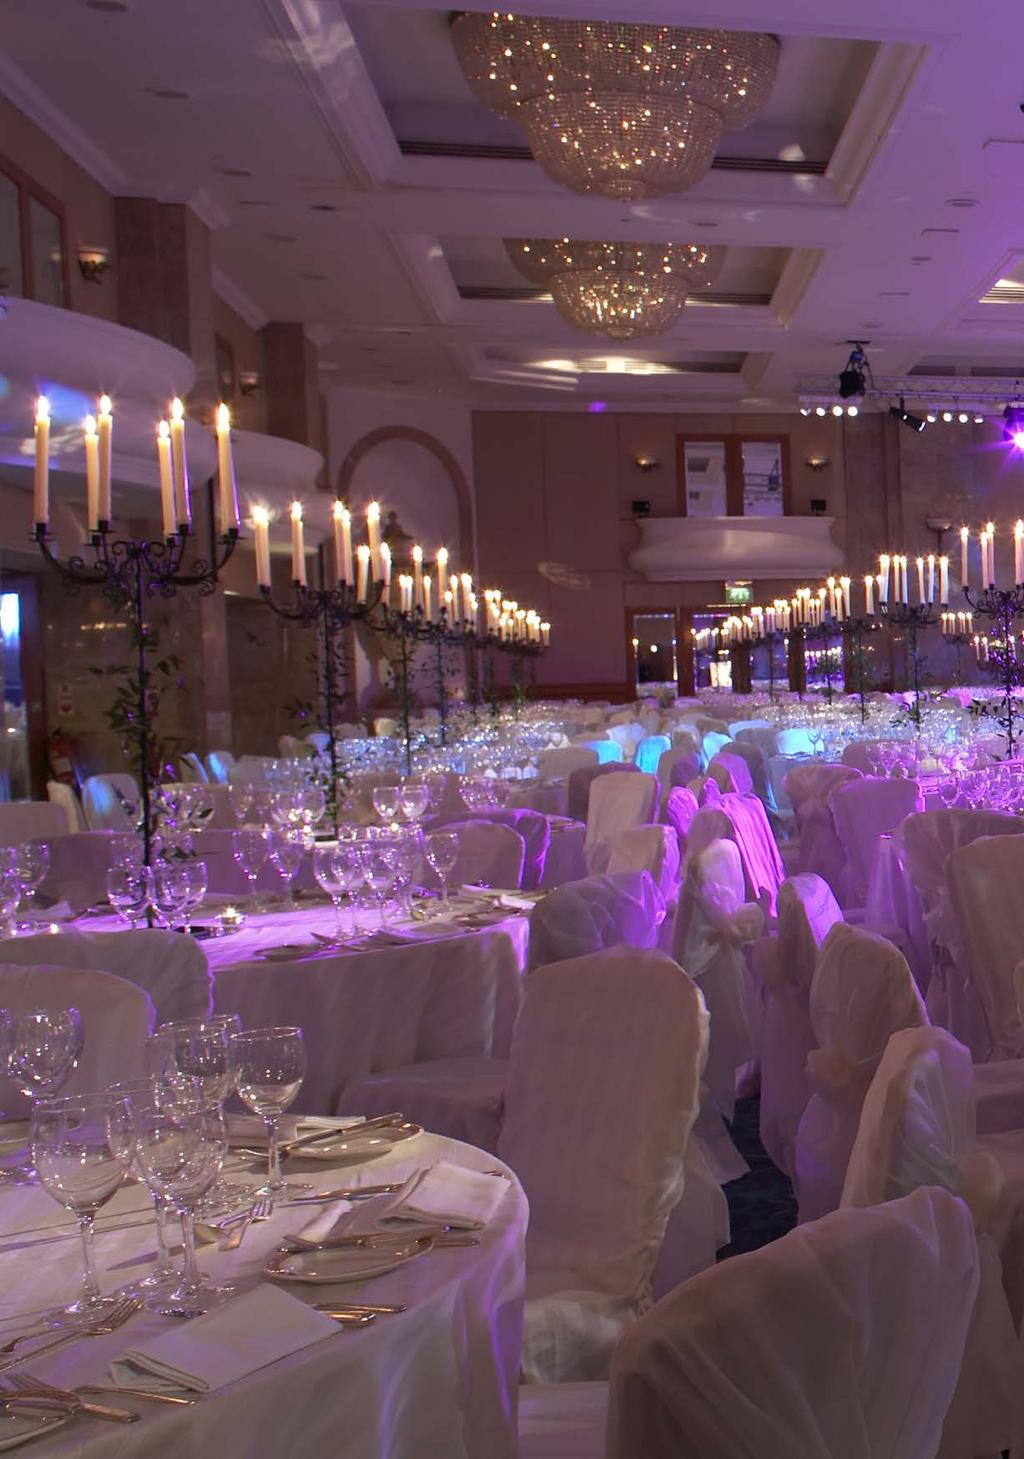 OUR VENUES Grand Ballroom Size: 38.4x28.4x5.2m (LxWxH) Suitable for the most dazzling of occasions, our Grand Ballroom is capable of hosting up to 1,250 guests, reception style.